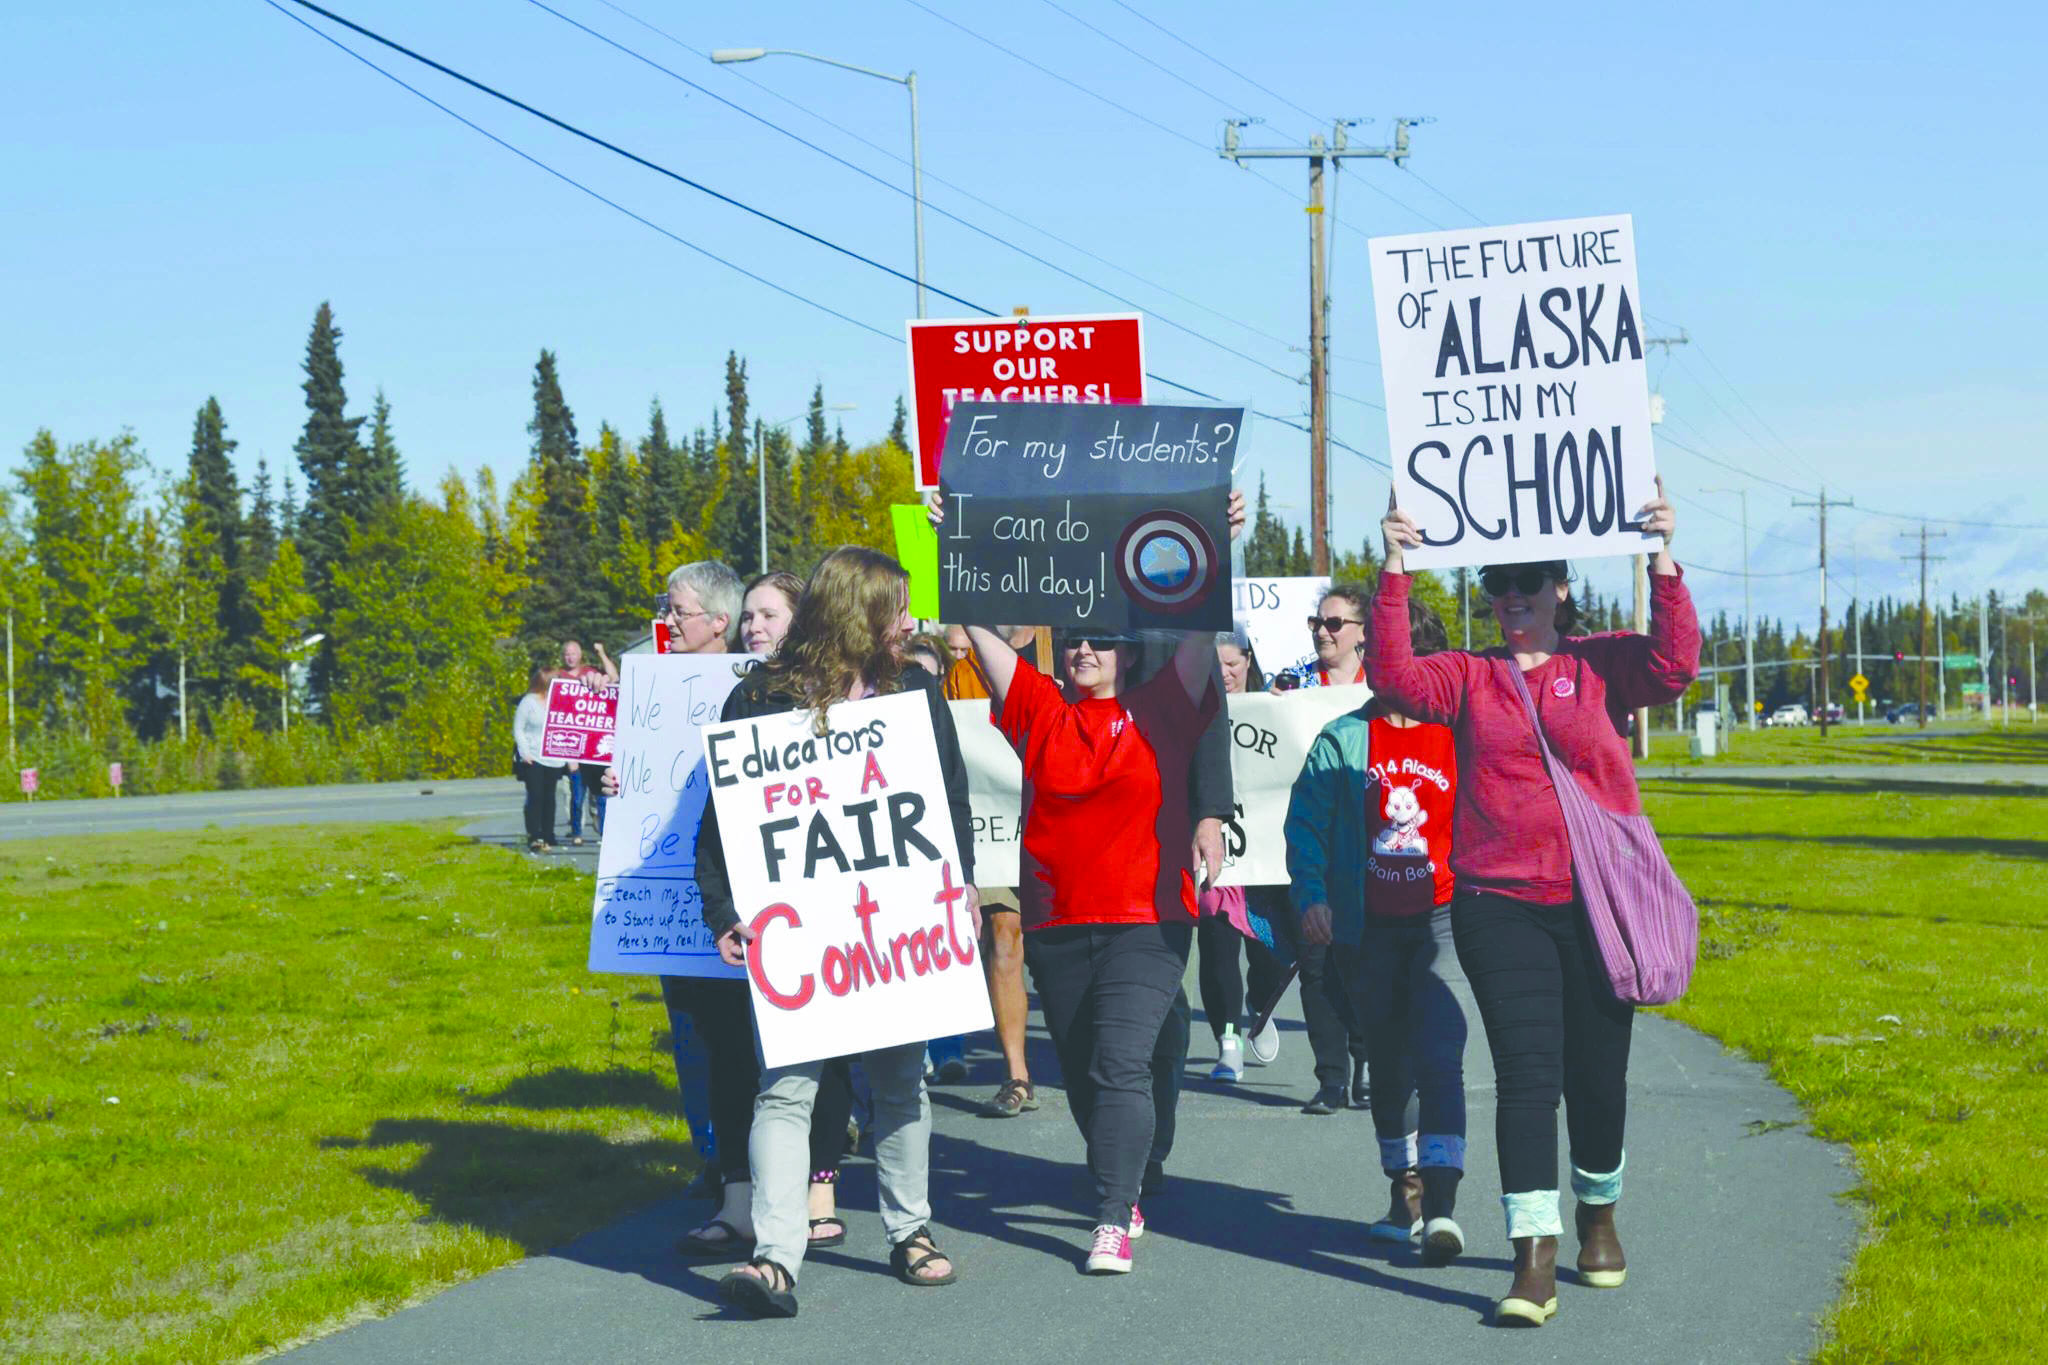 Educators rally in front of Kenai Central High School after school ahead of a strike called on by two employee associations, on Monday, Sept. 16, 2019, in Kenai, Alaska. (Photo by Victoria Petersen/Peninsula Clarion)